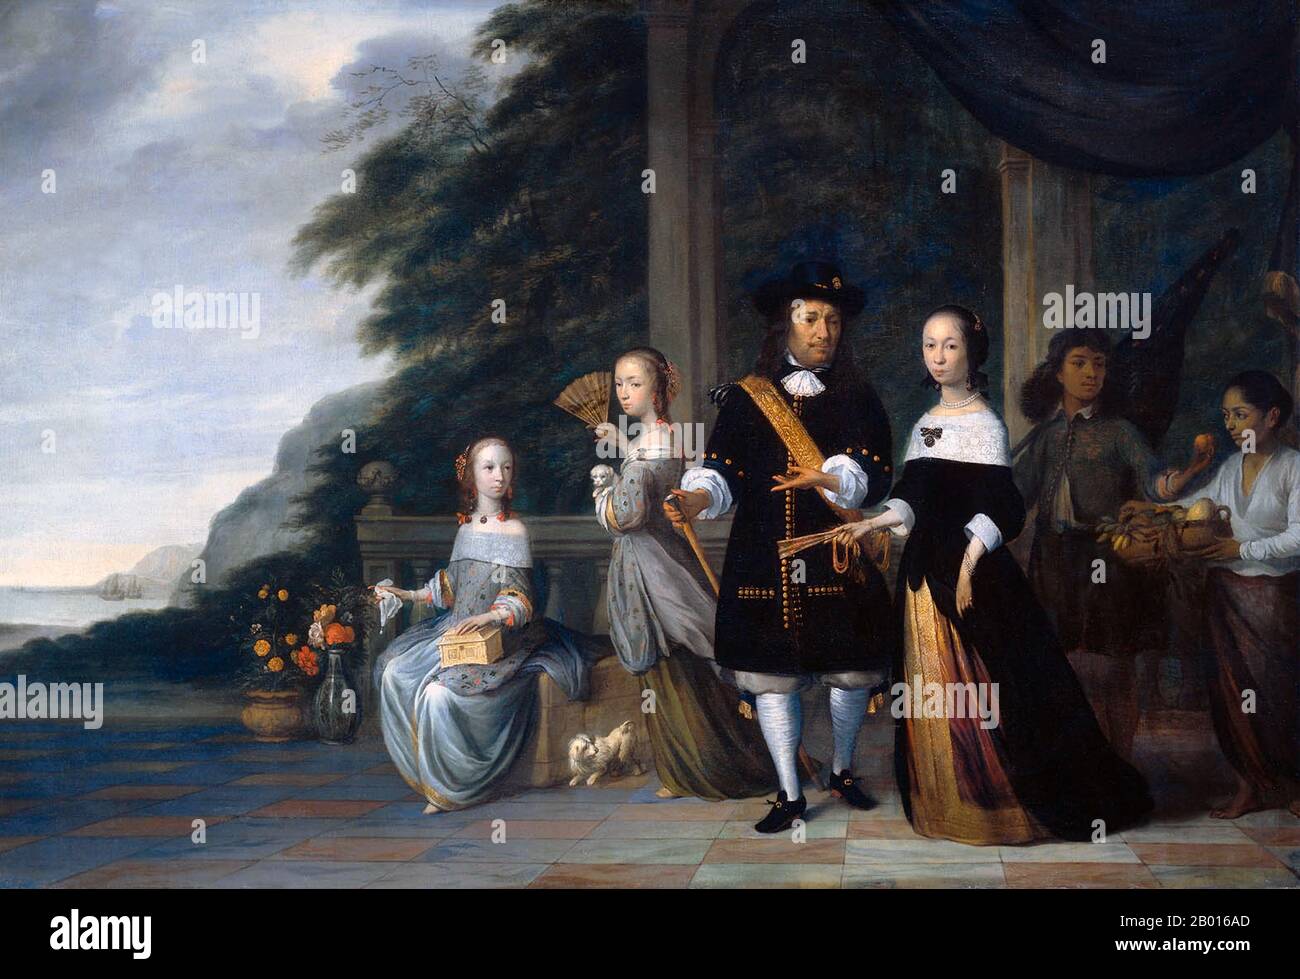 Netherlands/Indonesia: 'Pieter Cnoll, Cornelia van Nijenrode, their Daughters and Two Enslaved Servants'. Oil on canvas painting by Jacob Coeman (1632-1676), 1665.  Pieter Cnoll/Pieter Knoll (-1672) was a wealthy senior merchant representing the Dutch East India Company (VOC) as Director General in Batavia (now Jakarta), a major port and Dutch trade centre in the 17th century. Cnoll was married to a Eurasian woman, Cornelia van Nijenroode, who was the daughter of a Japanese woman and Cornelis van Nieuwroode, a VOC governor in Japan. Stock Photo